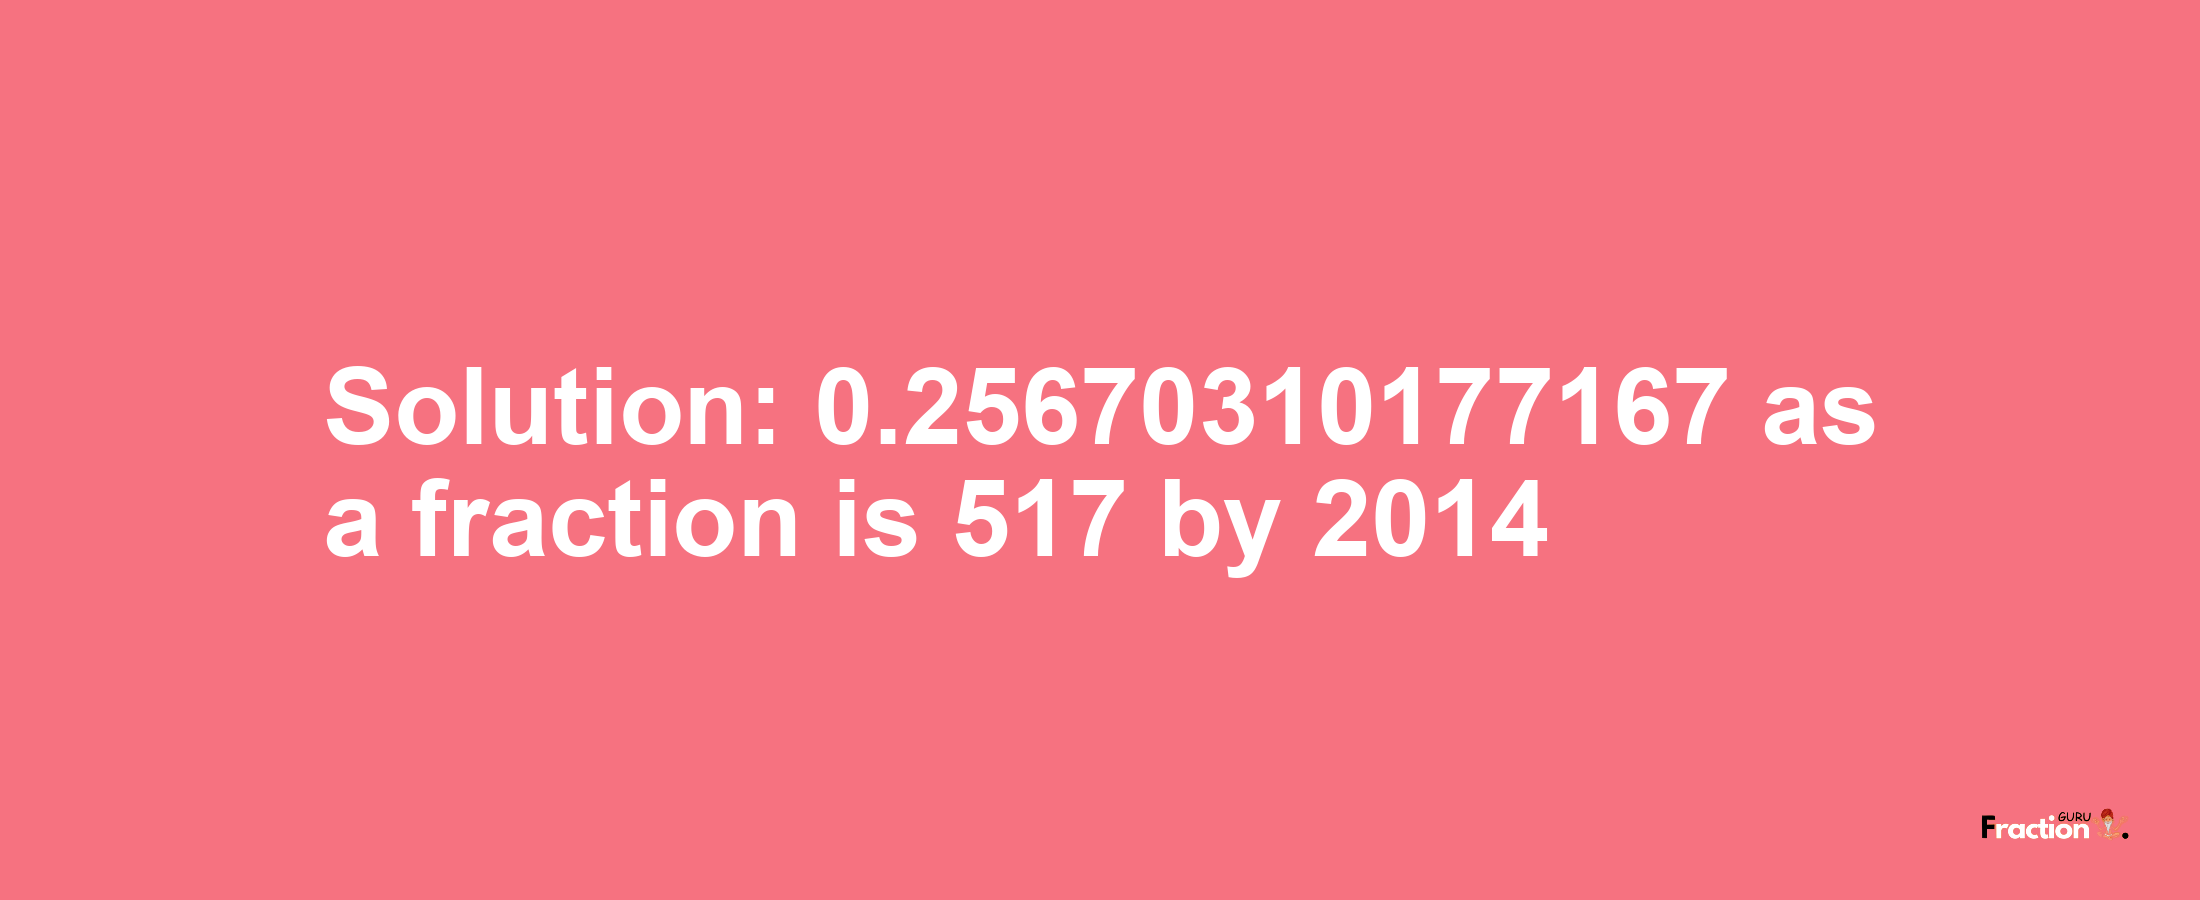 Solution:0.25670310177167 as a fraction is 517/2014